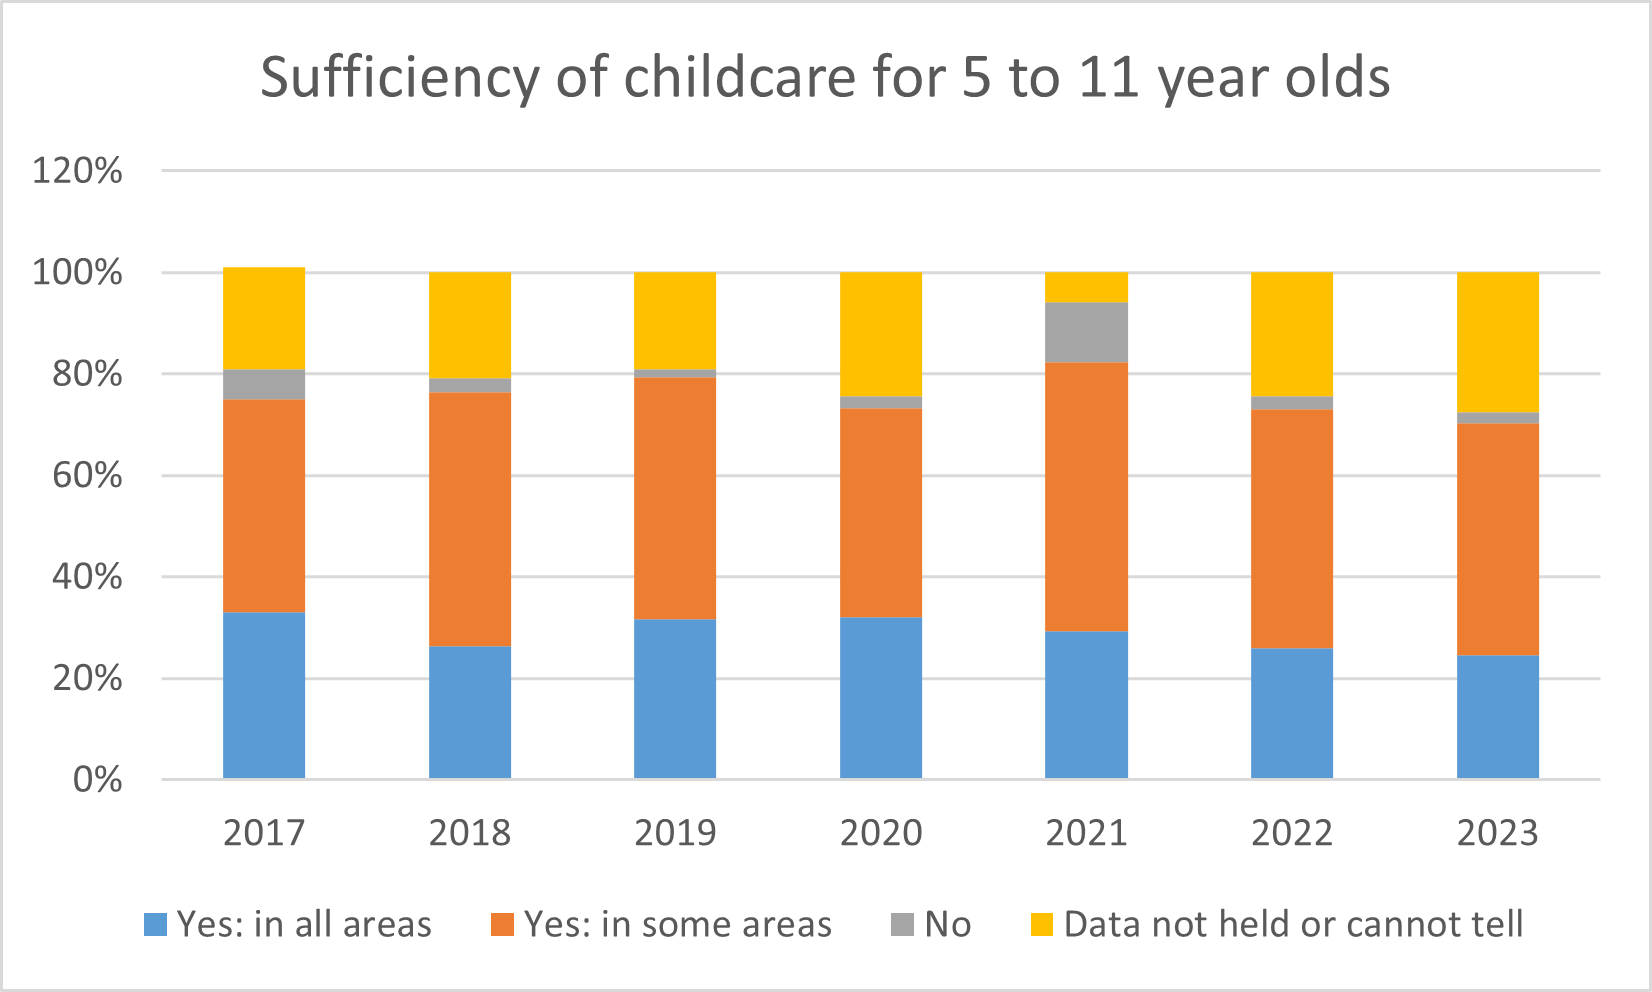 Bar graph showing local authority assessment of sufficiency of childcare for five to 11 years olds from 2017 to 2023. 